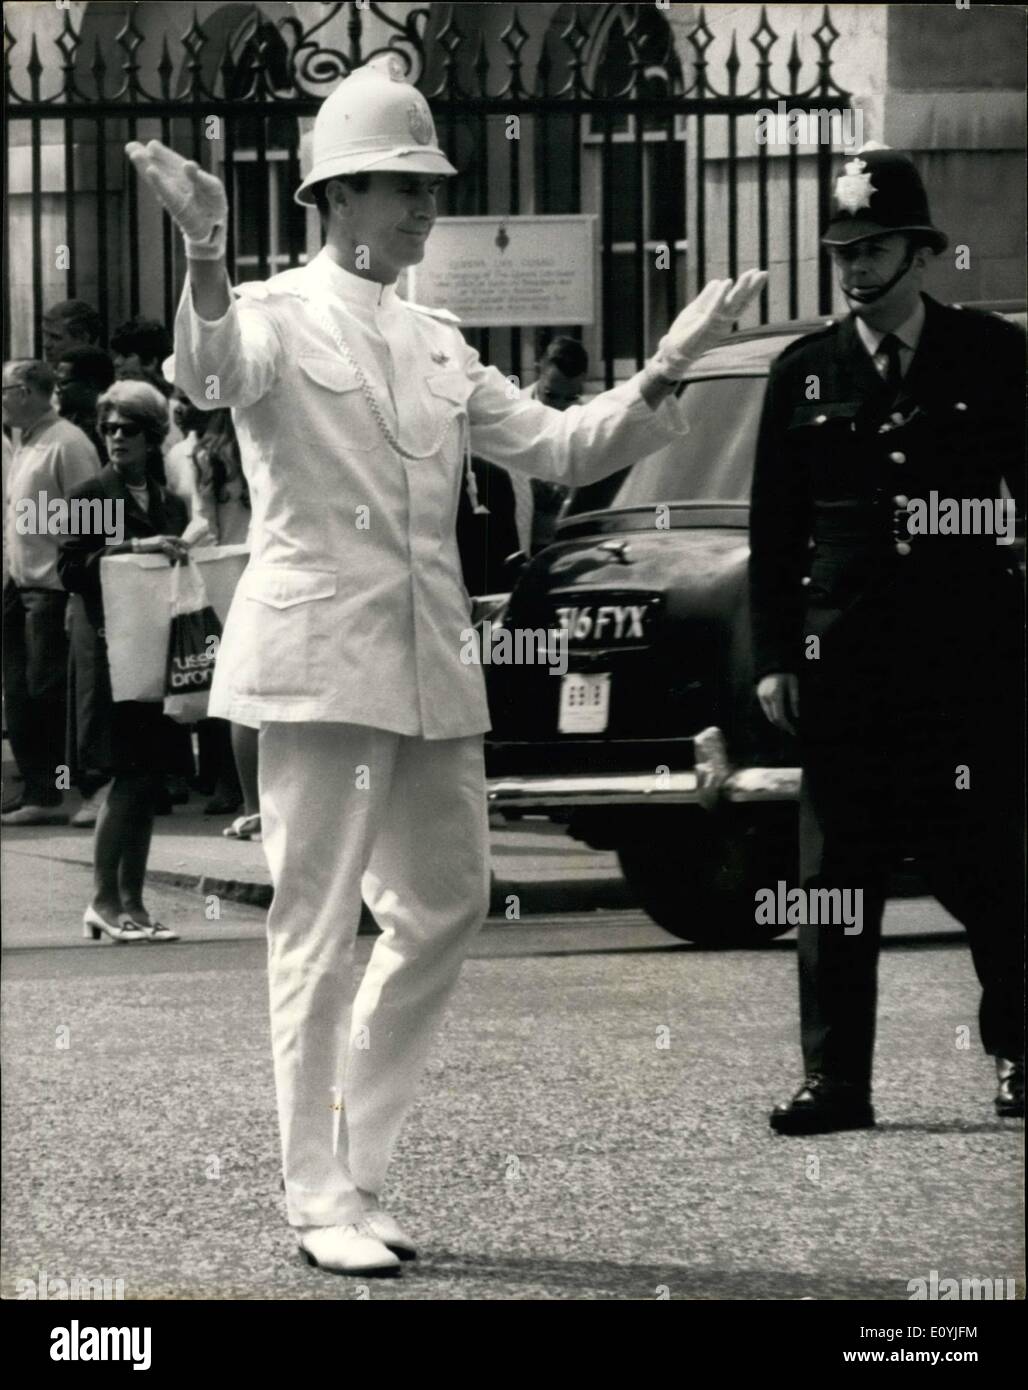 Jul. 07, 1970 - The Dancing Policeman Conduct London Traffic. As part of the British European Airways Fly East programme, a Yugoslav policeman is on a courtesy visit to London. He is one of the leading male dancers in the Belgrade Ballet Company. Standing 6ft. 6 In in his dress uniform (complete with pin helmet), this afternoon he realized an ambition to direct London's traffic in ballet style. He is 34 years old Jovan Bulj, from Belgrade, and while on duty at home, he amuses the motorists and pedestrians with his ballet movement Stock Photo